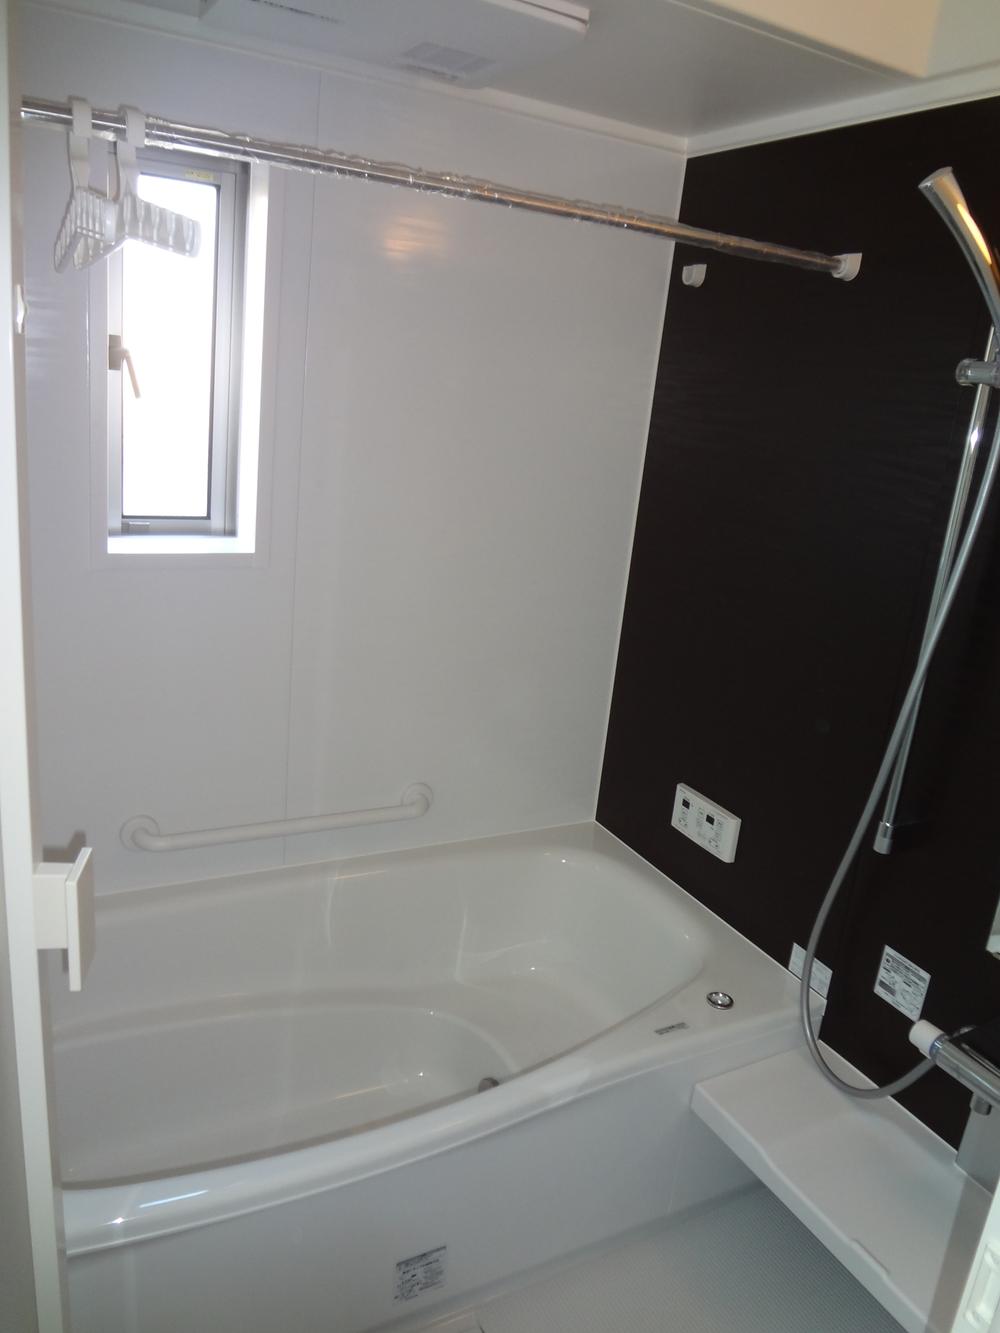 Same specifications photo (bathroom). Building 3 bathroom construction example photo  With bathroom ventilation drying function